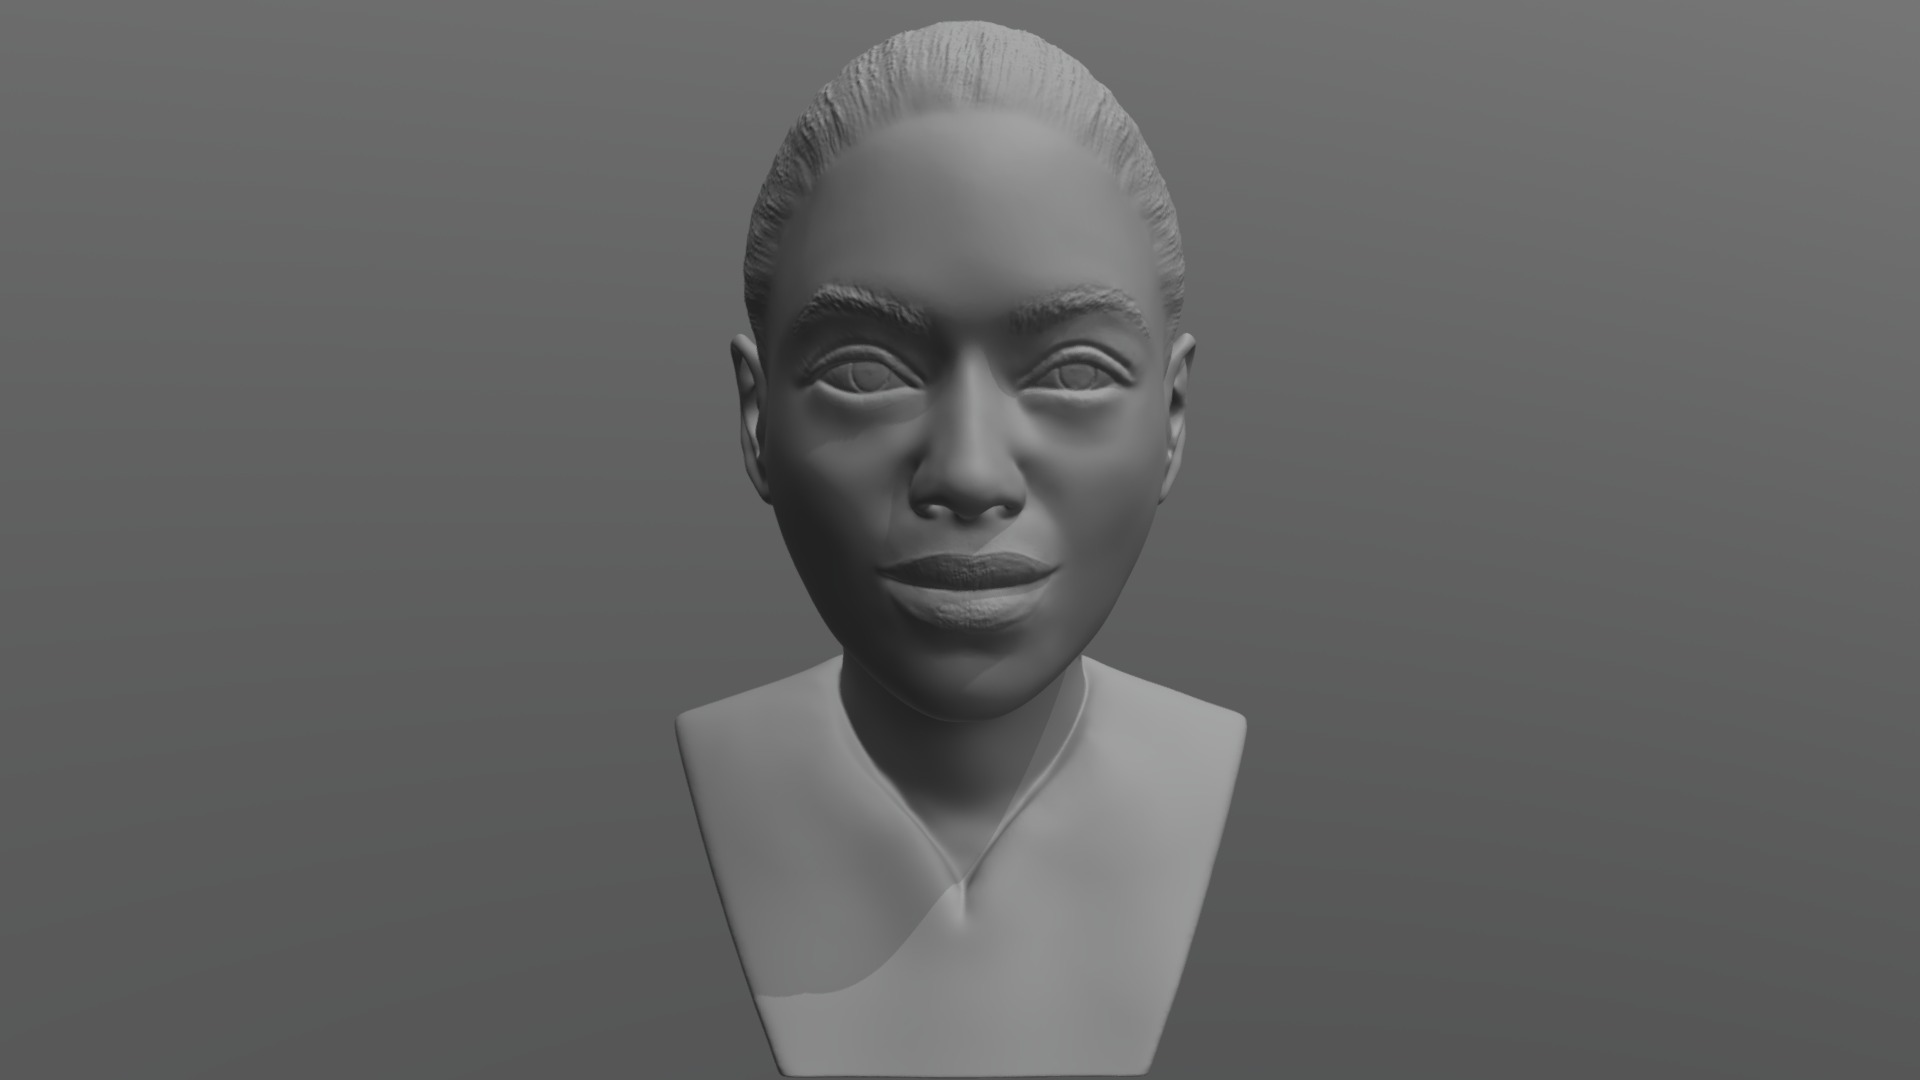 3D model Beyonce Knowles bust for 3D printing - This is a 3D model of the Beyonce Knowles bust for 3D printing. The 3D model is about a person with a white headdress.